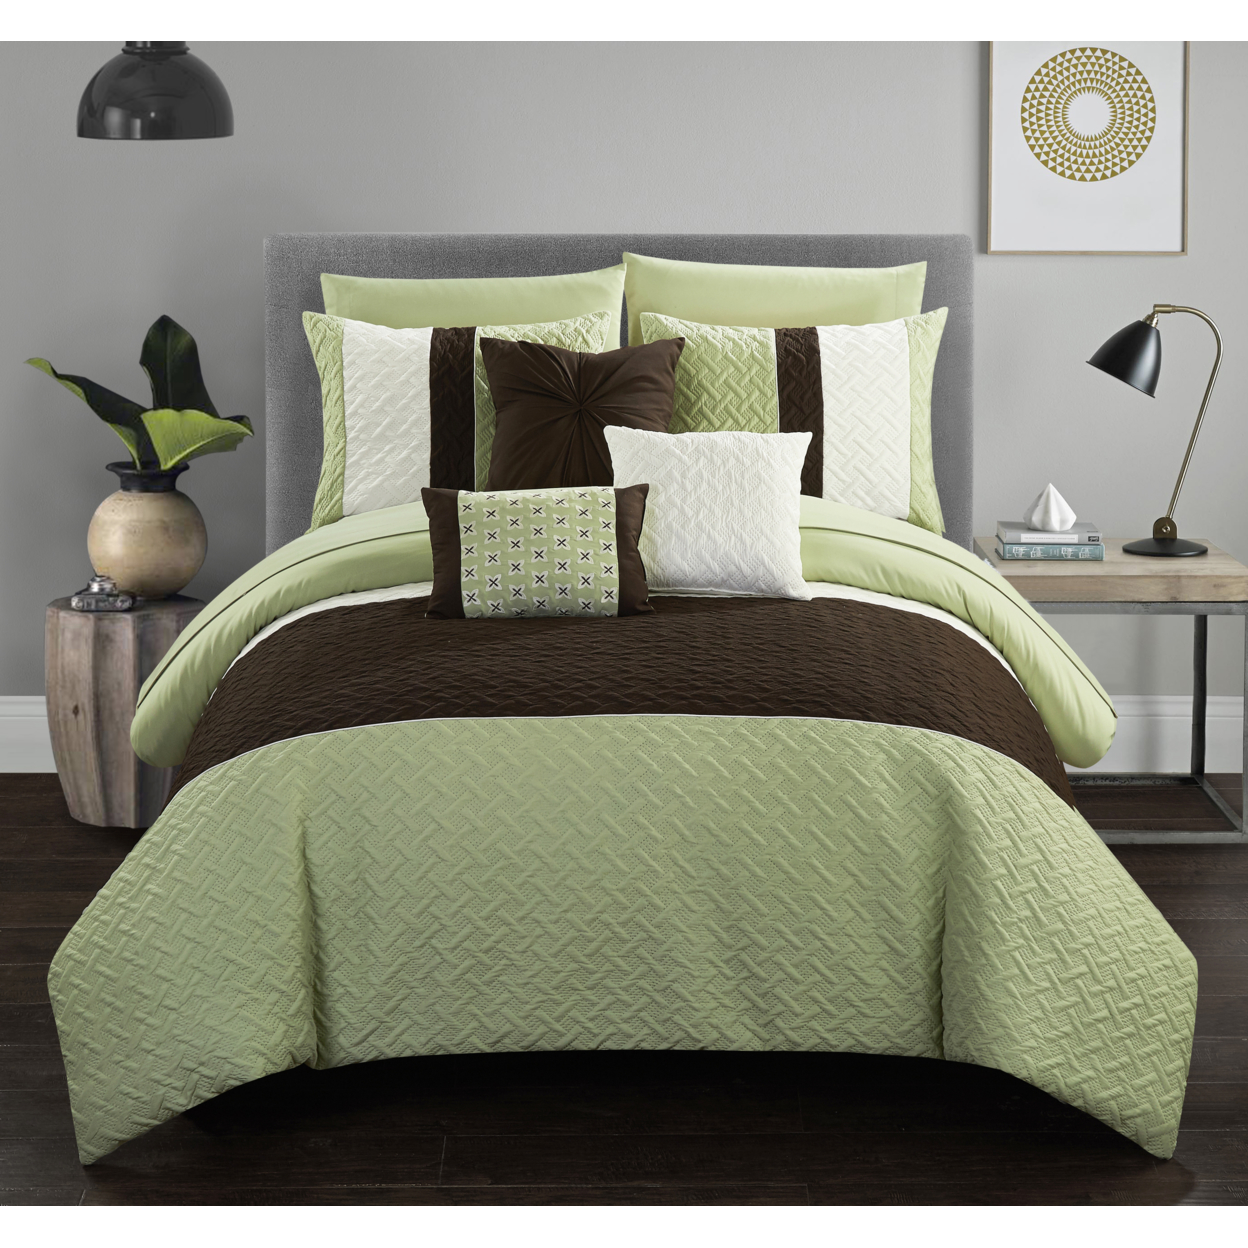 Chic Home Shaila 10 Or 8 Piece Comforter Set Color Block Quilted Embroidered Design Bed In A Bag Bedding - Green, Twin